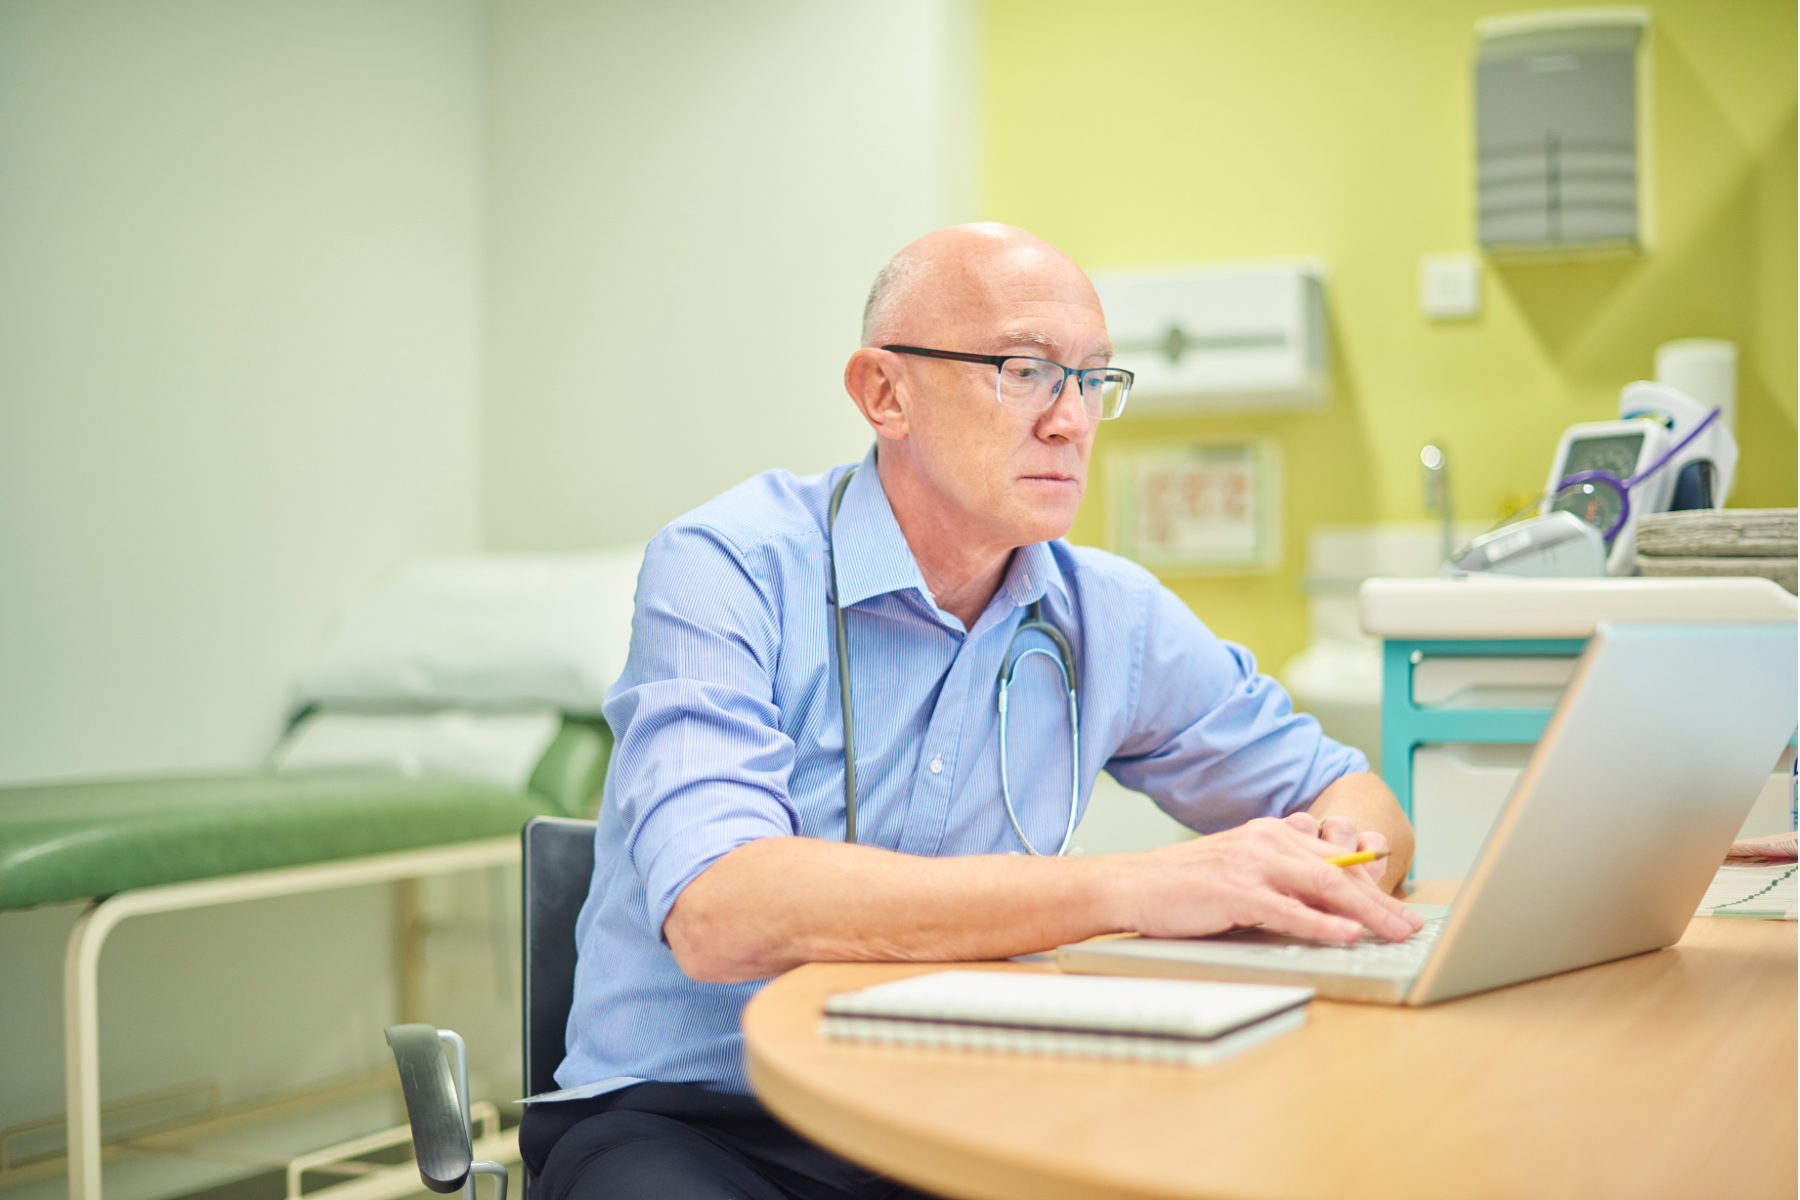 Image of a doctor using a laptop in his exam room